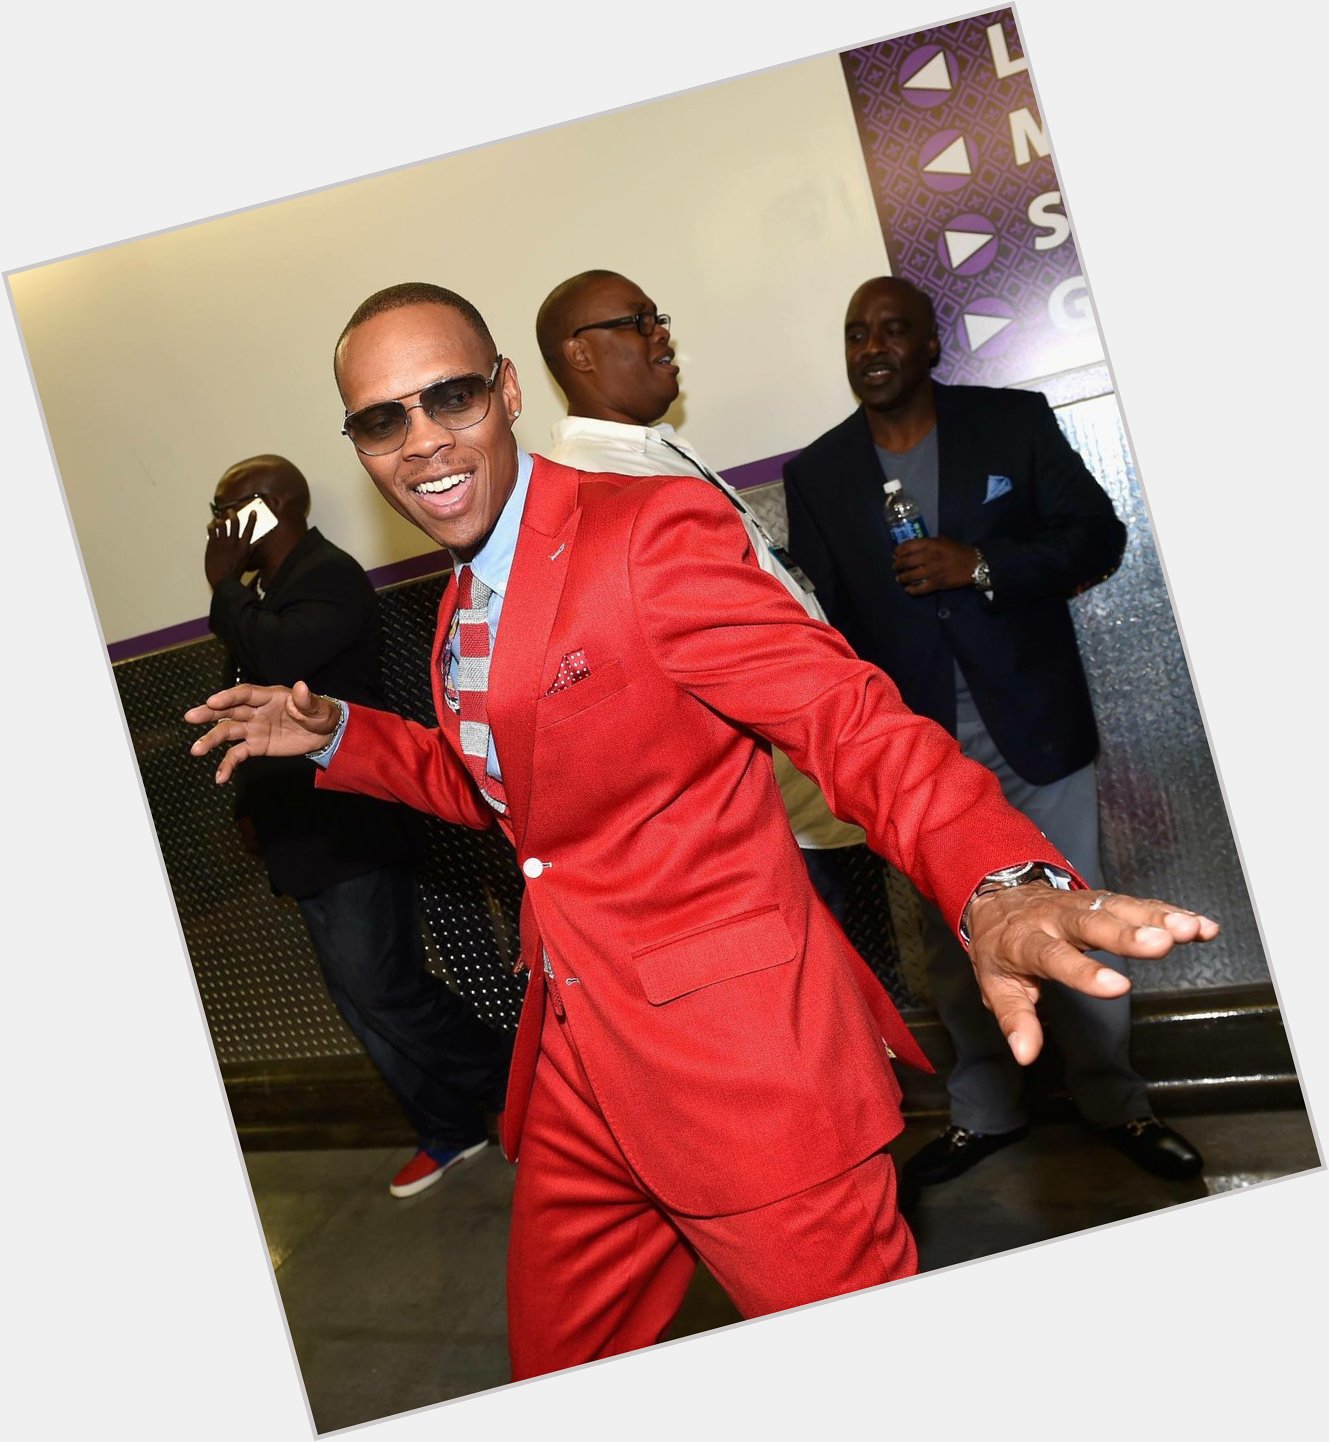 Happy birthday     Ronnie DeVoe. May God bless you many more years to come. 